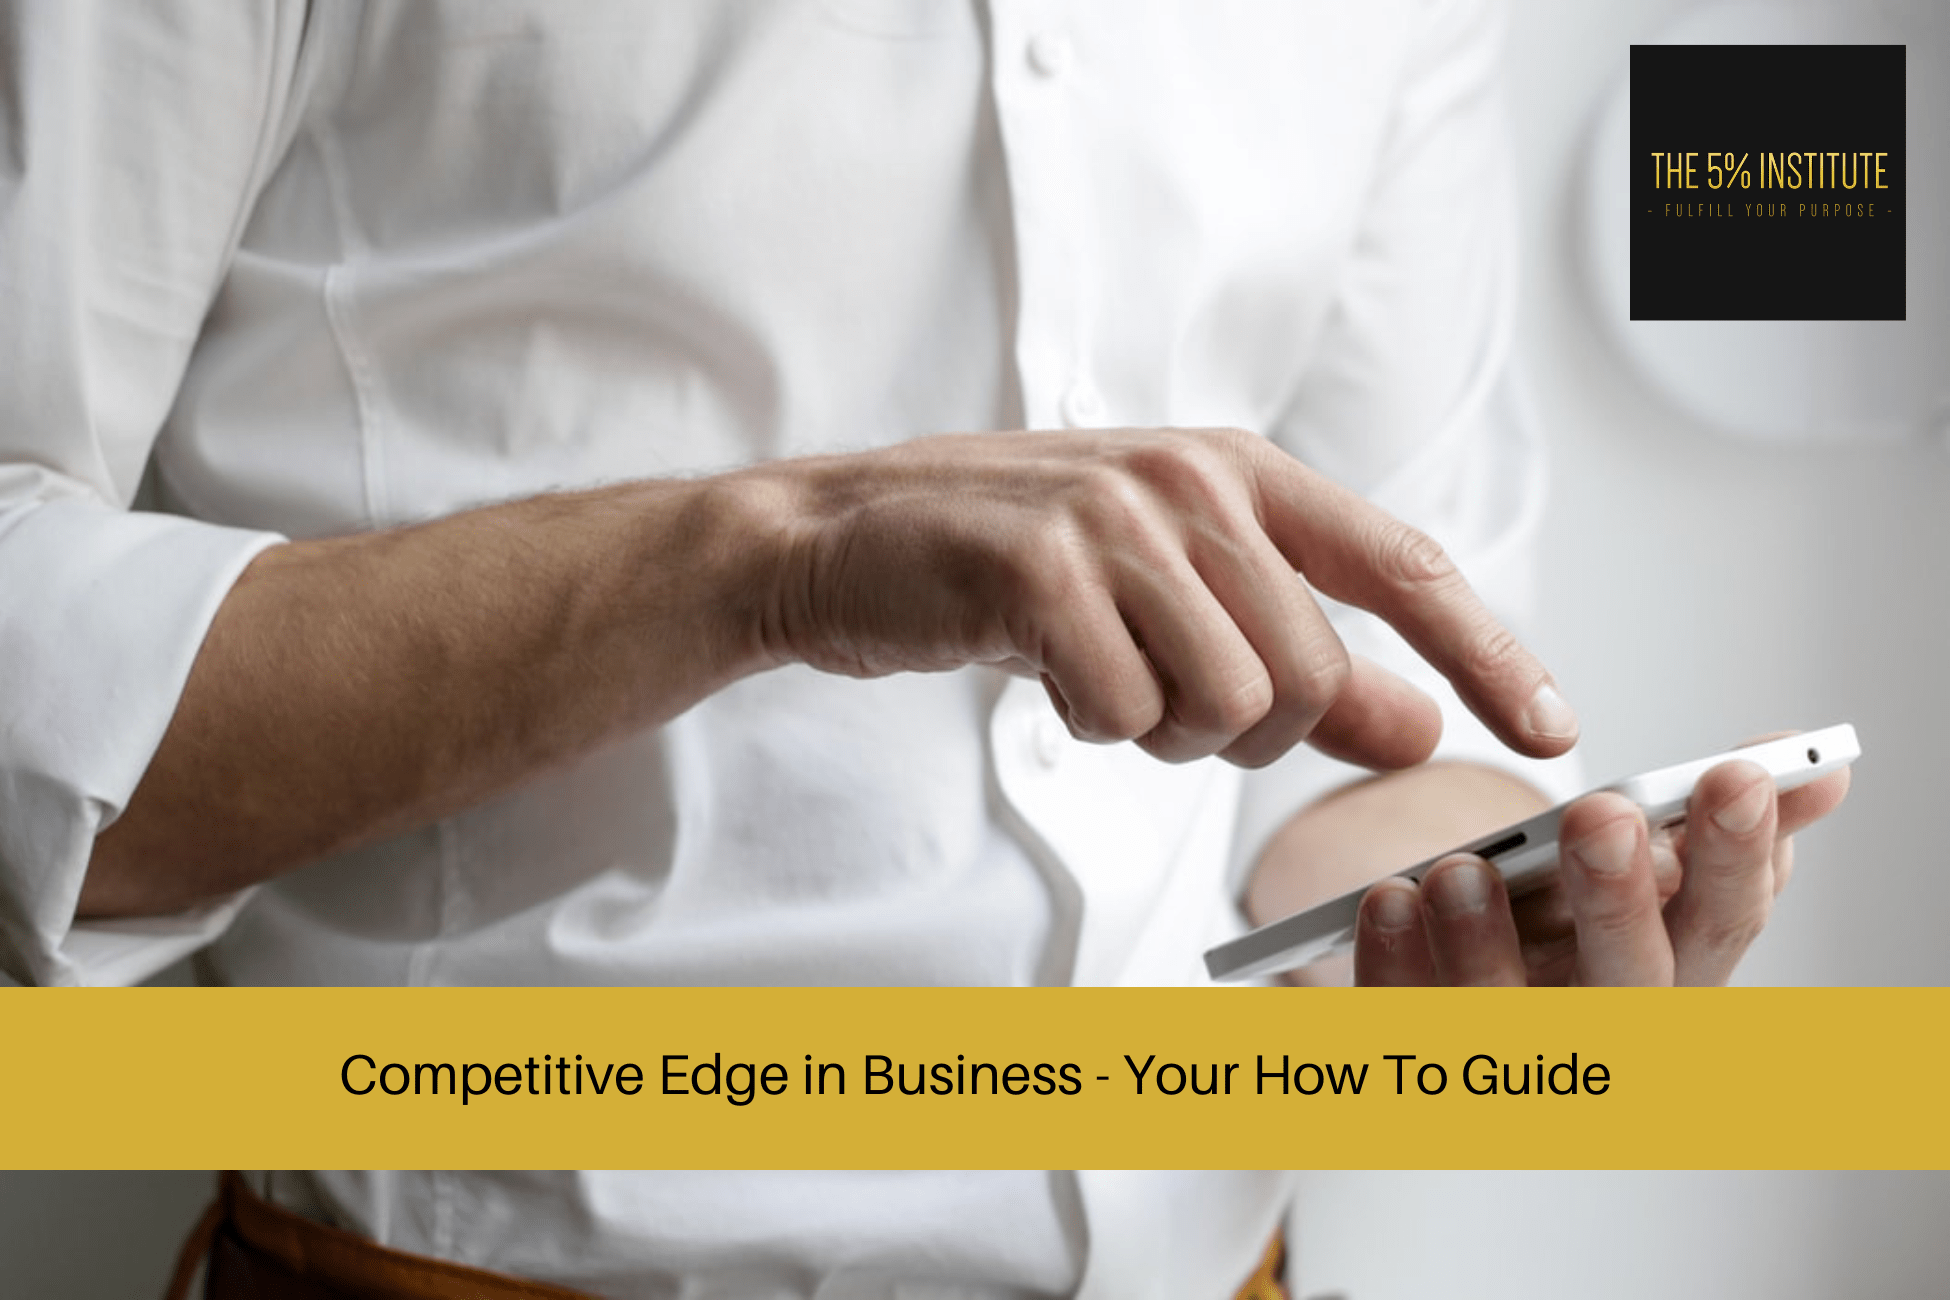 Competitive Edge in Business - Your How To Guide